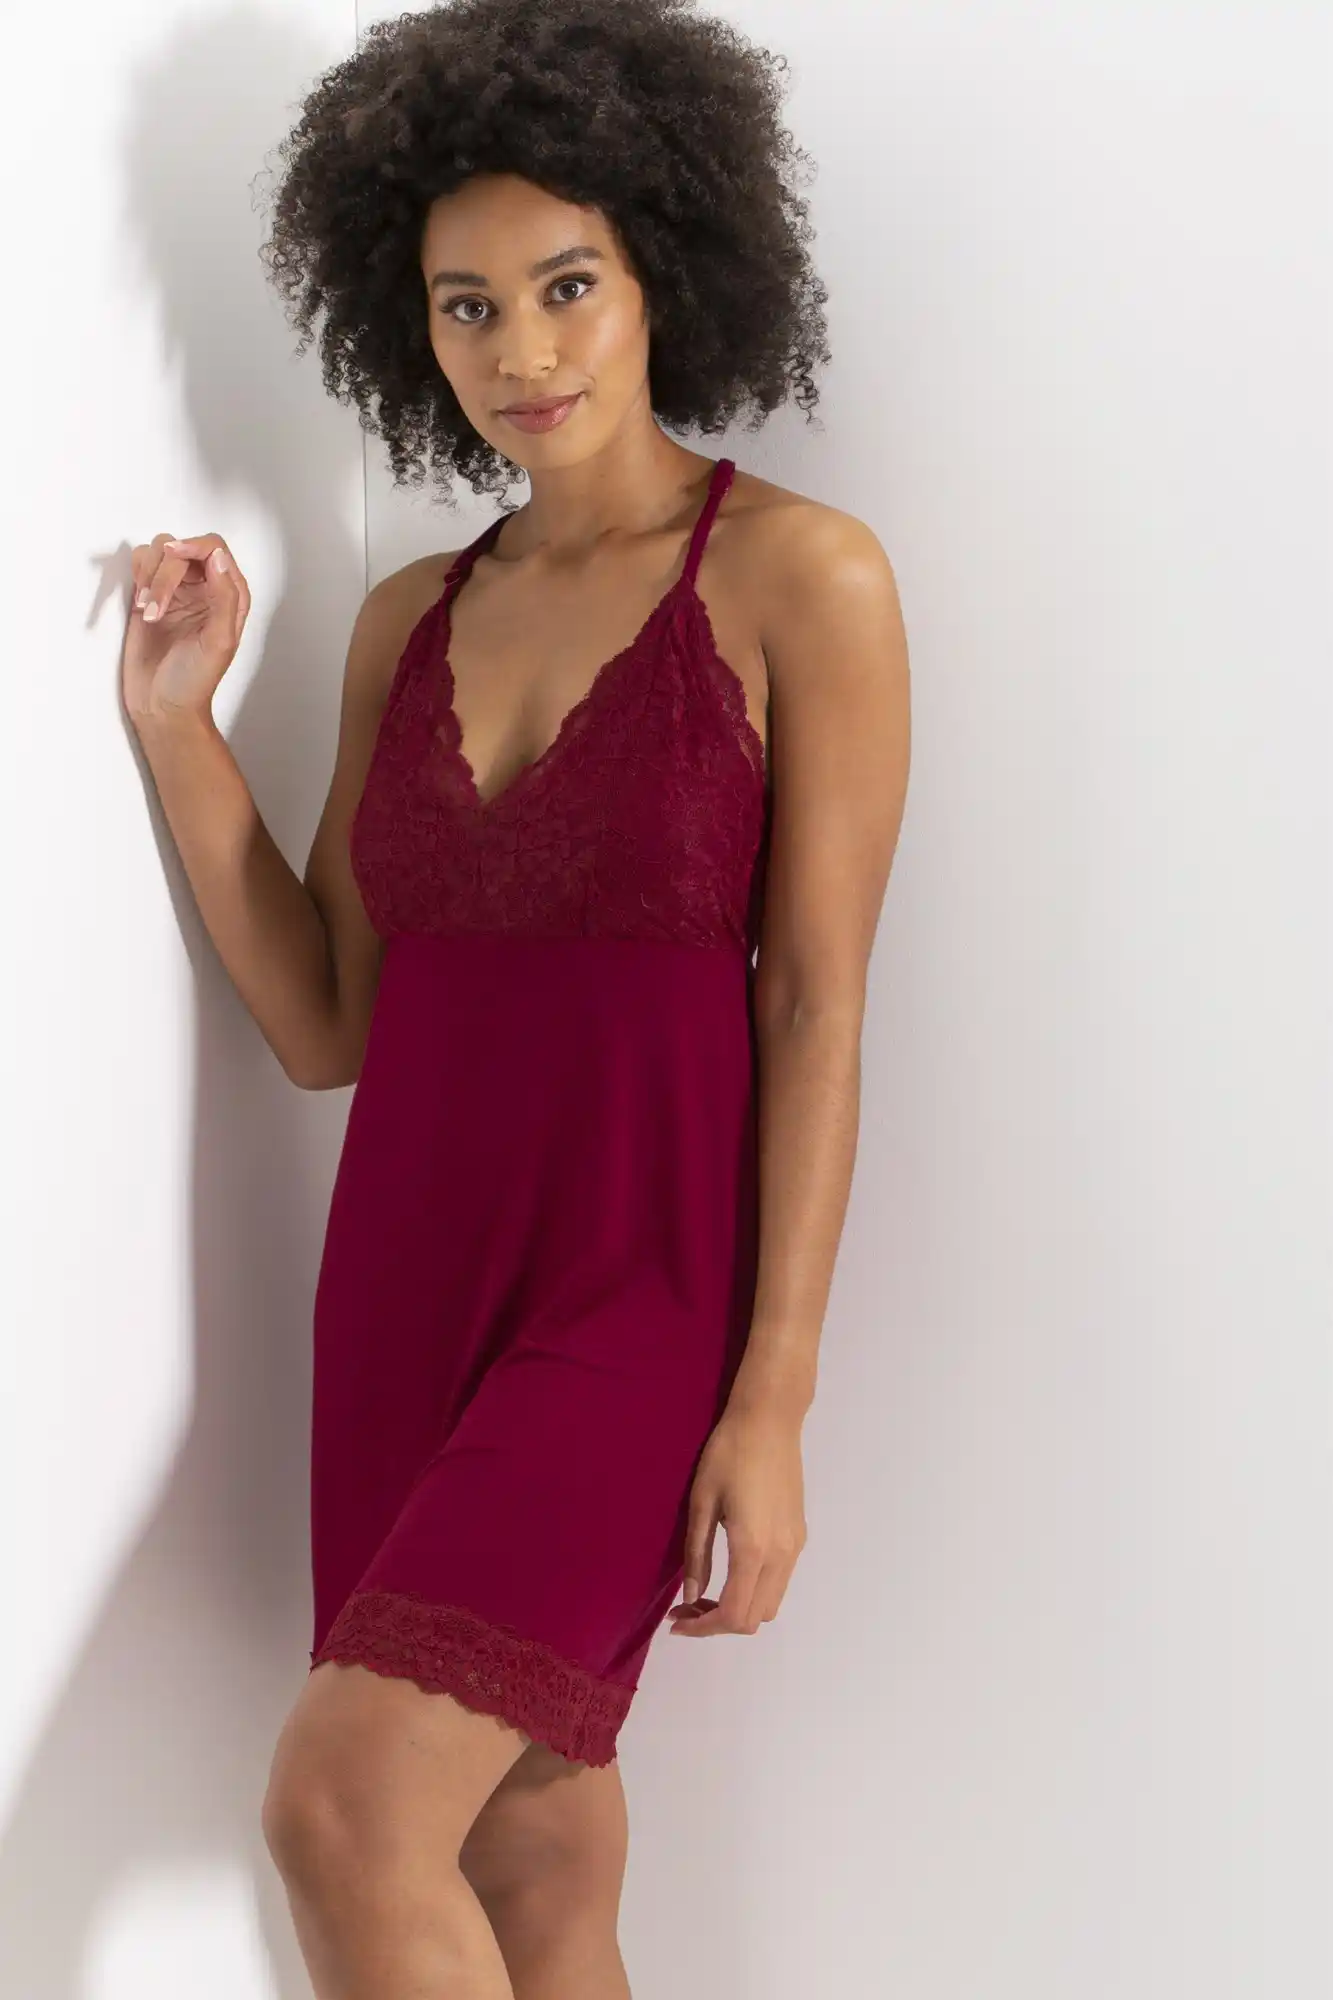 Opulence Chemise, Pour Moi, Opulence Chemise, Red/Pink, Lace